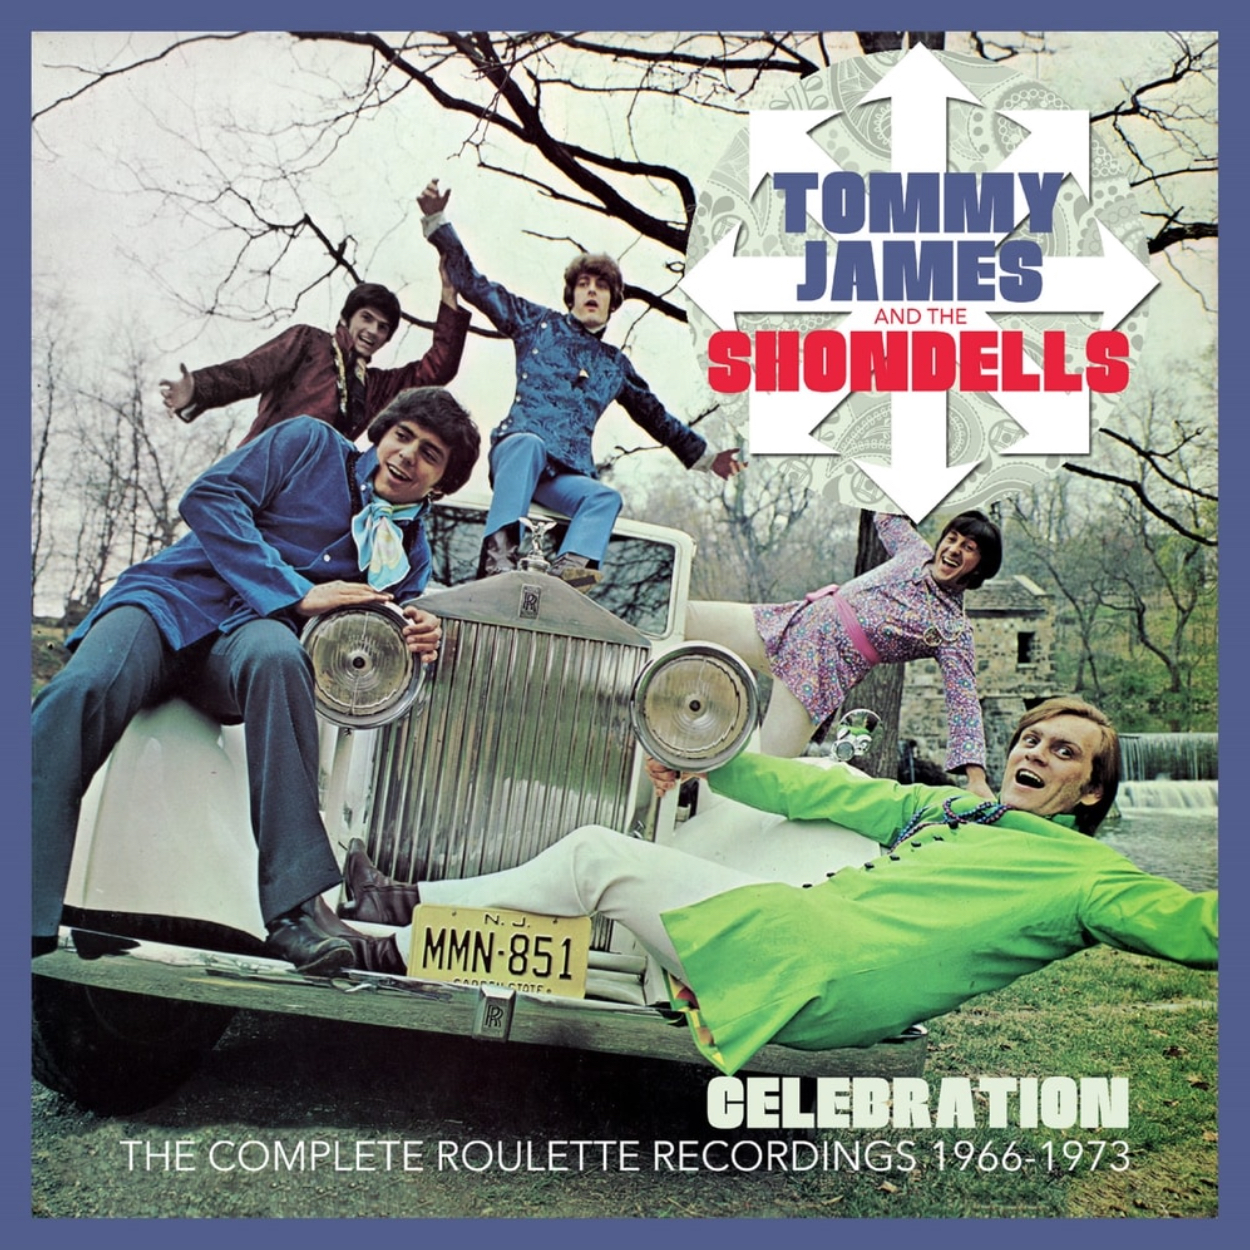 Tommy James And The Shondells’ Complete Roulette Recordings Box Due